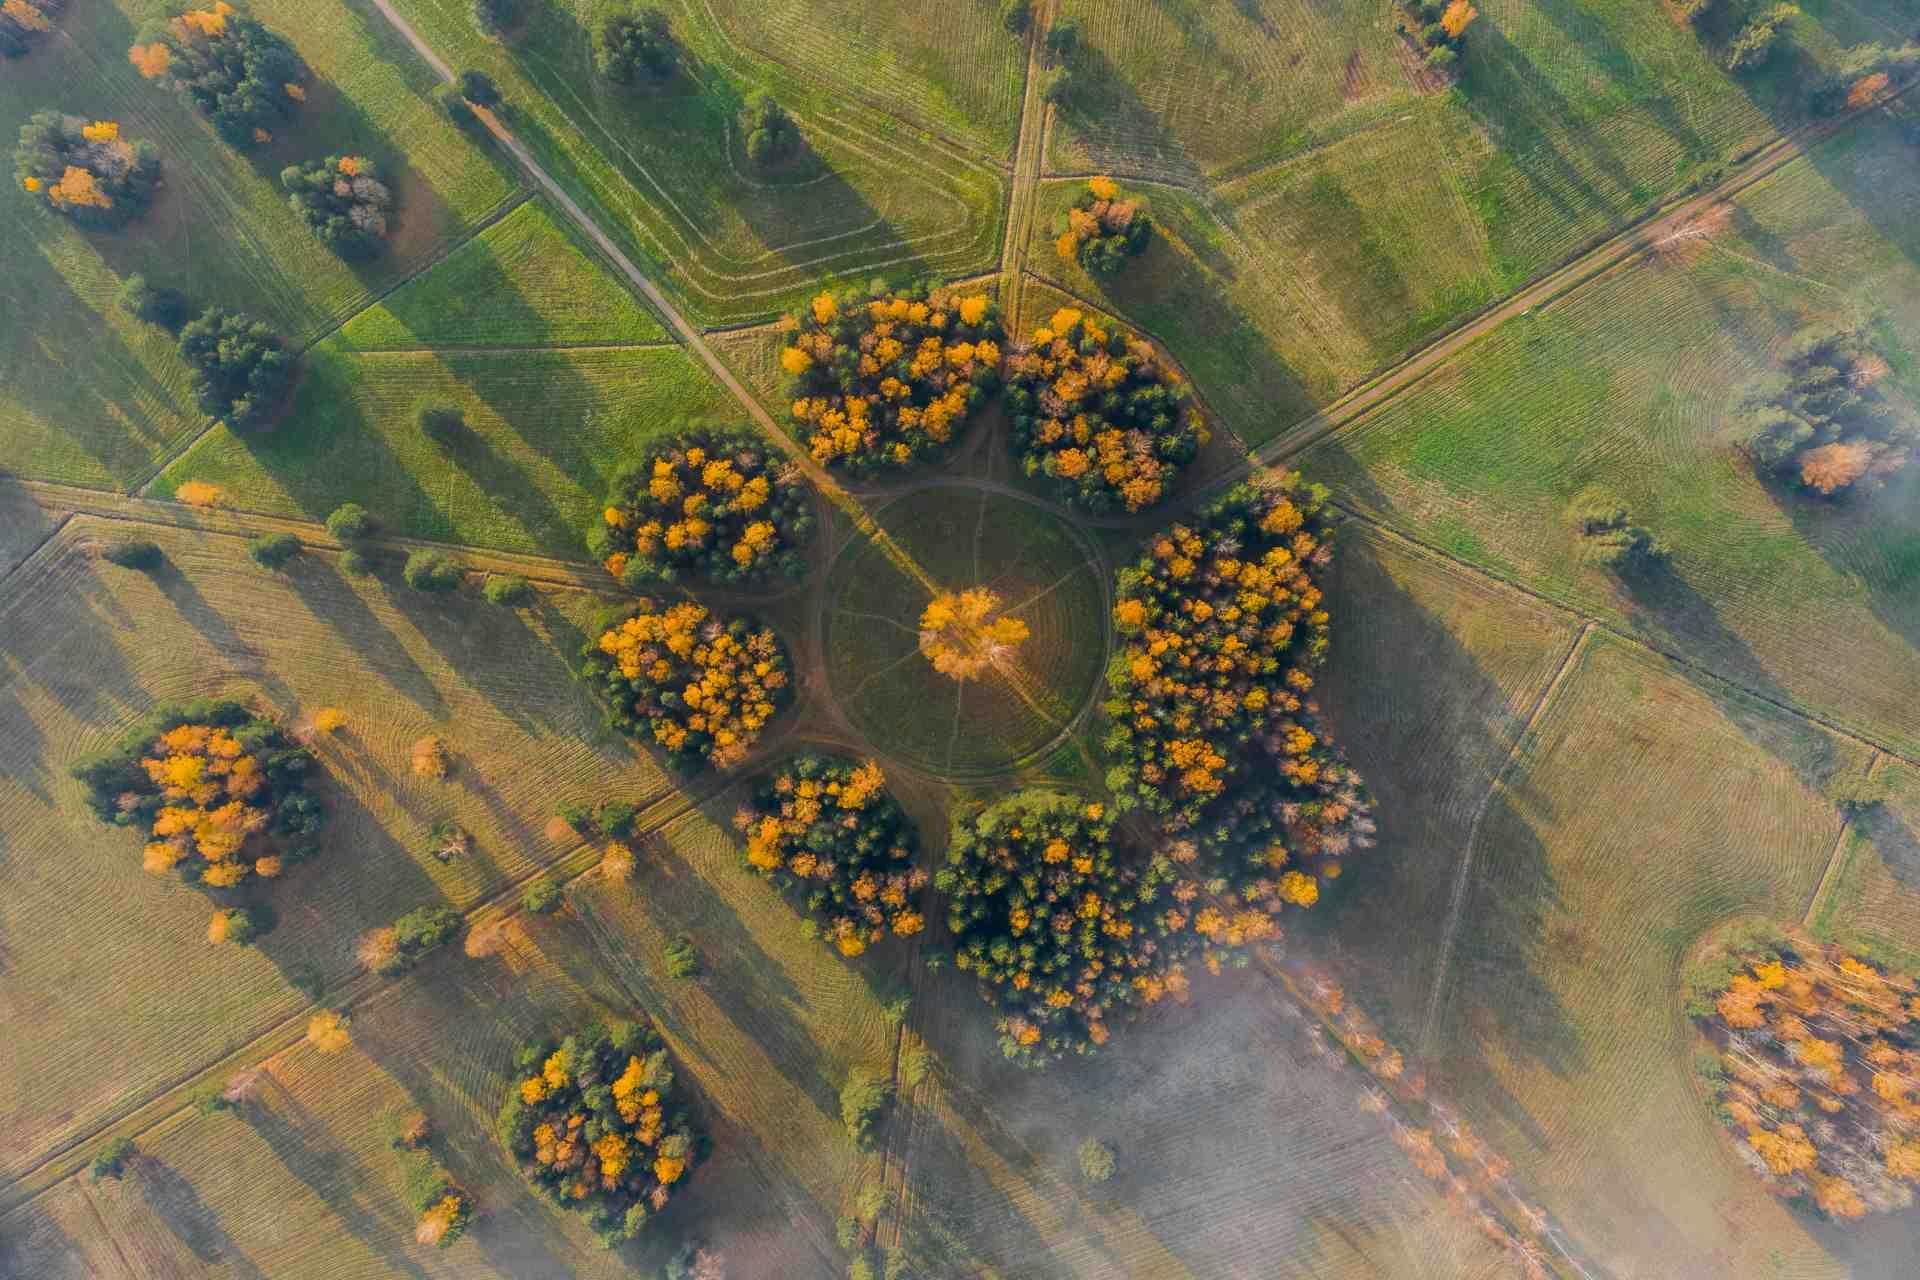 Aerial view of a circle of white birches in Pavlovsky Park, golden autumn, the tops of the trees are painted yellow, through the clouds, roads in the forest, long shadows from the trees